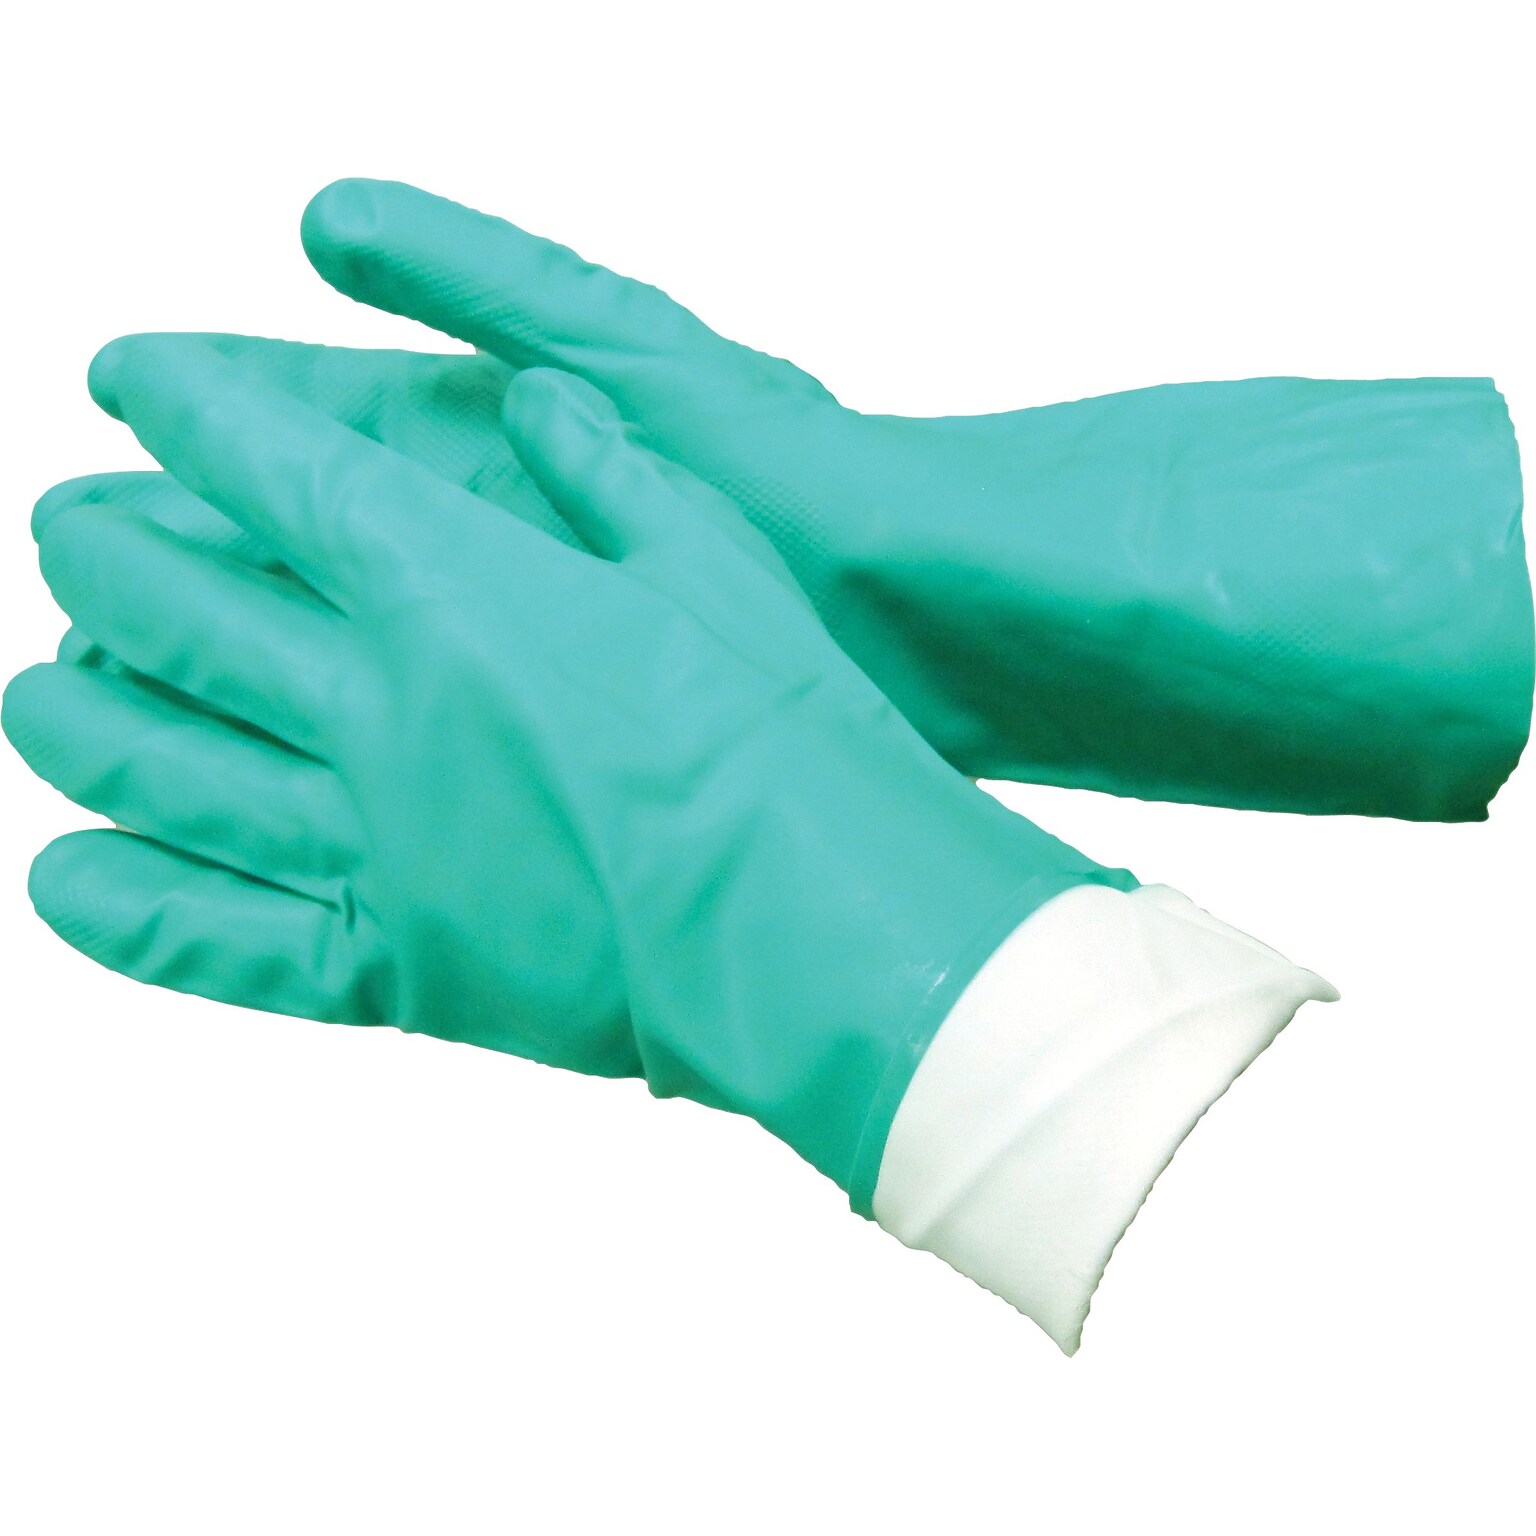 Tradex® Flock Lined Gloves, Green Nitrile, Extra Large, 12 Pair (NTL650XL/HDG)